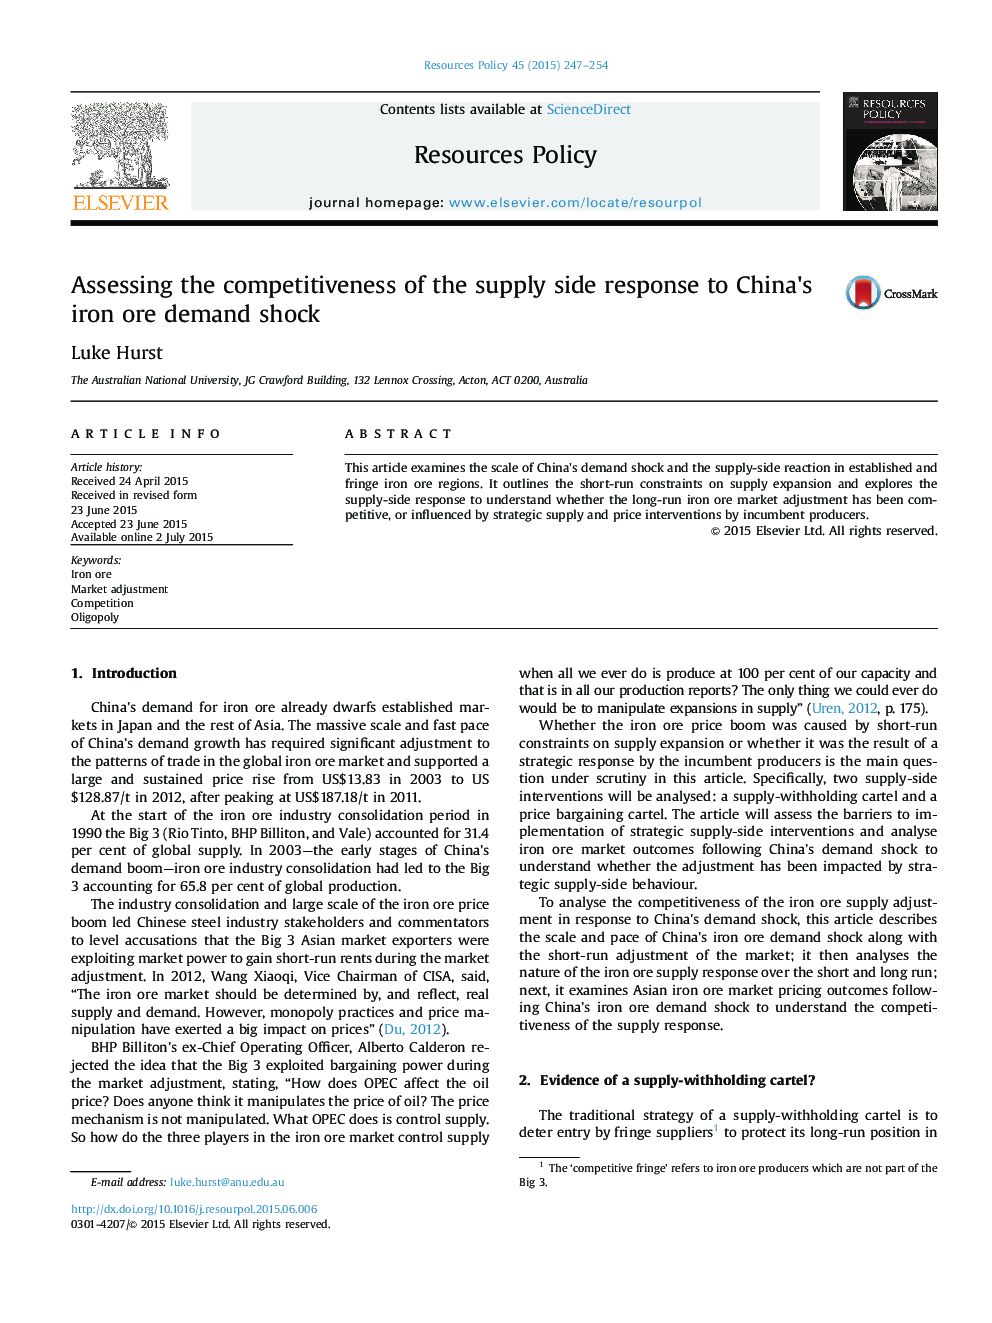 Assessing the competitiveness of the supply side response to China's iron ore demand shock